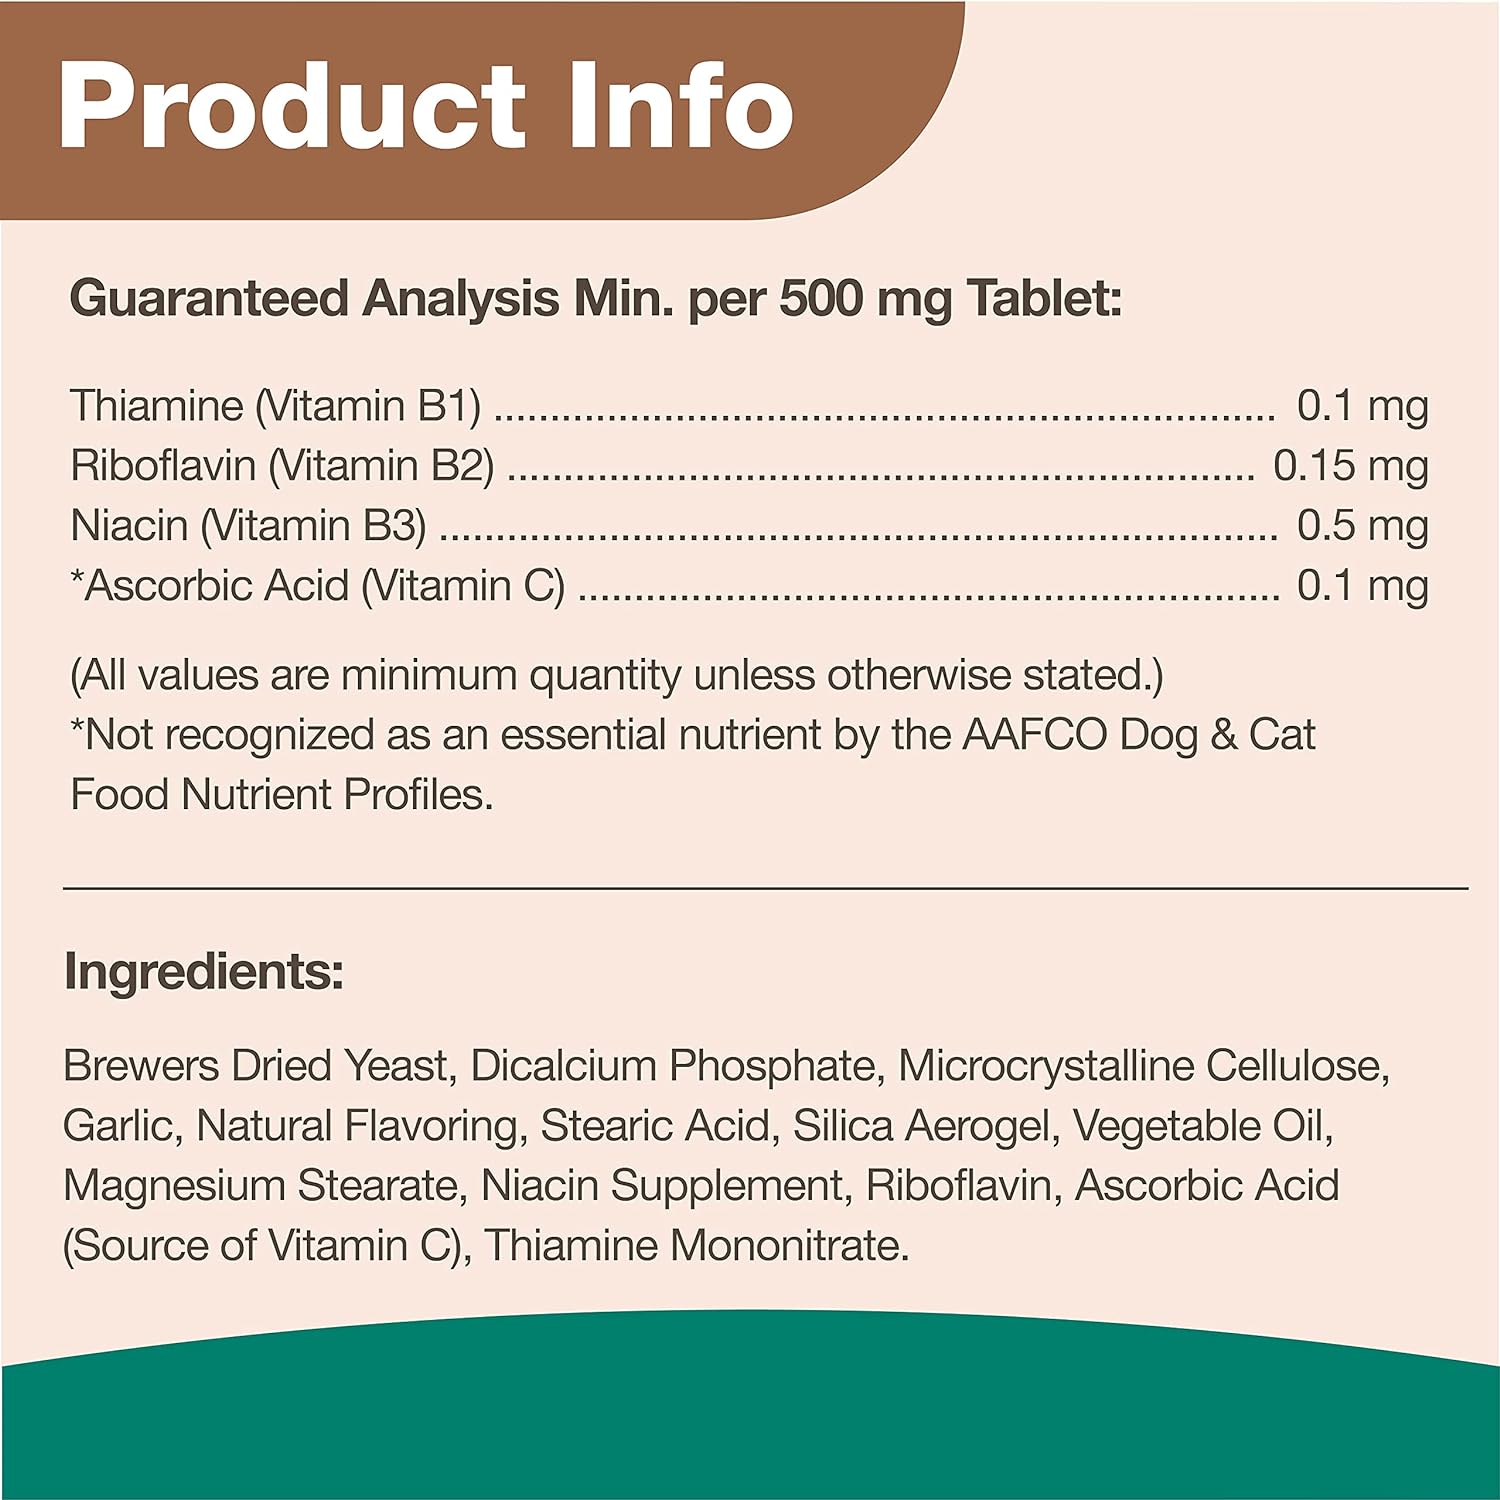 NaturVet Brewers Dried Yeast Formula with Garlic Flavoring Plus Vitamins for Dogs and Cats, Chewable Tablets, Made in The USA with Globally Source Ingredients 100 Count : Pet Antioxidant Nutritional Supplements : Pet Supplies